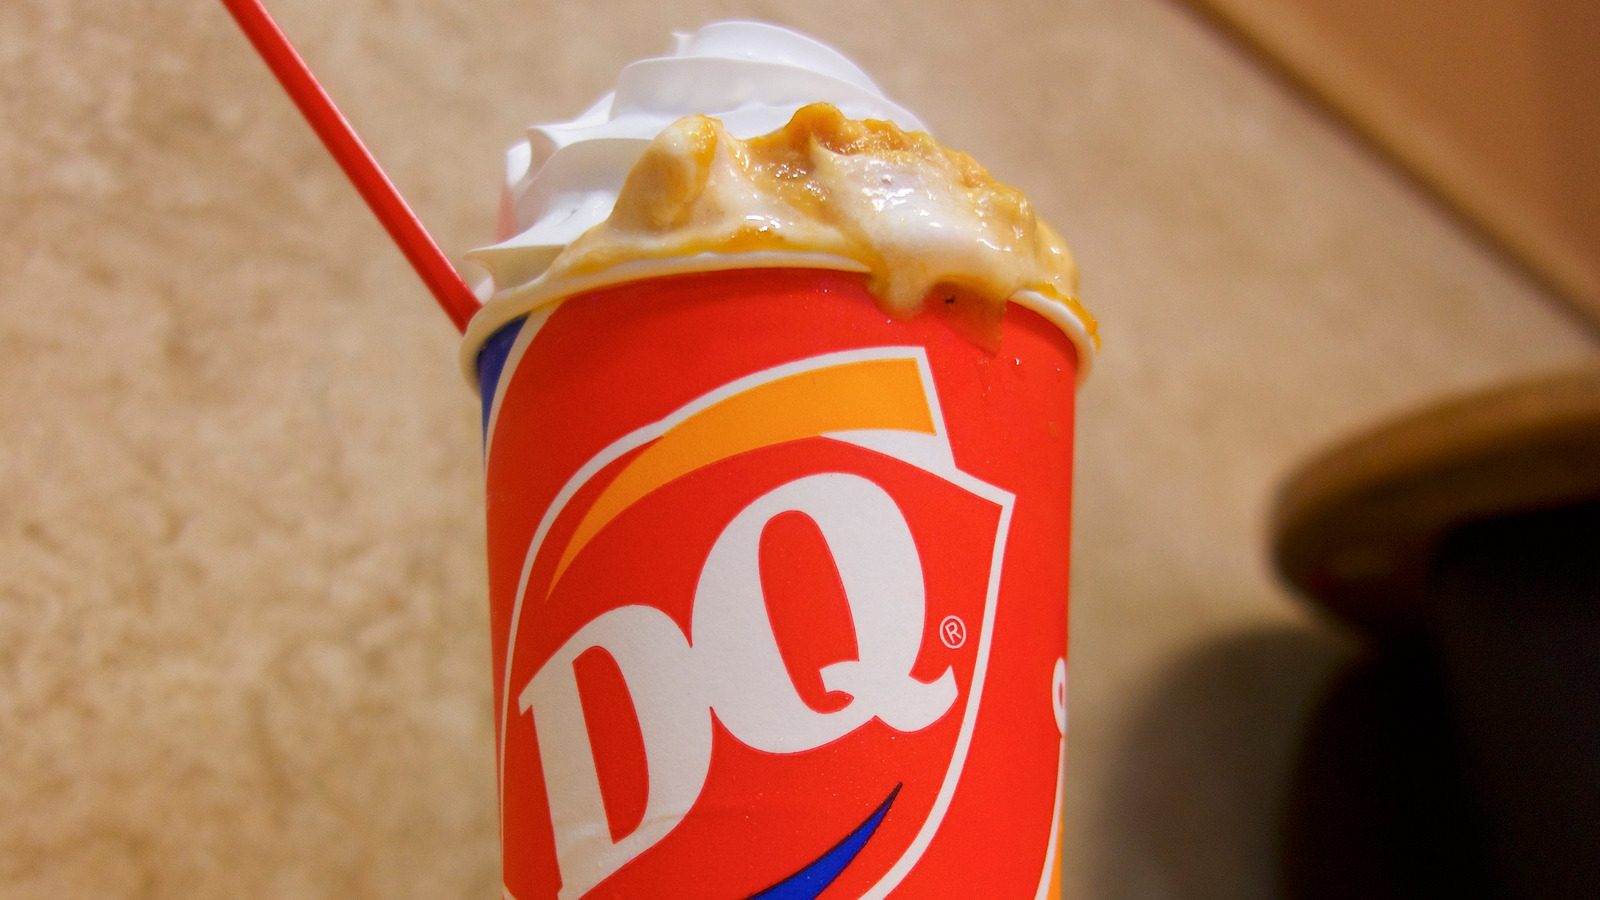 Dairy Queen - Back seats were made for treats